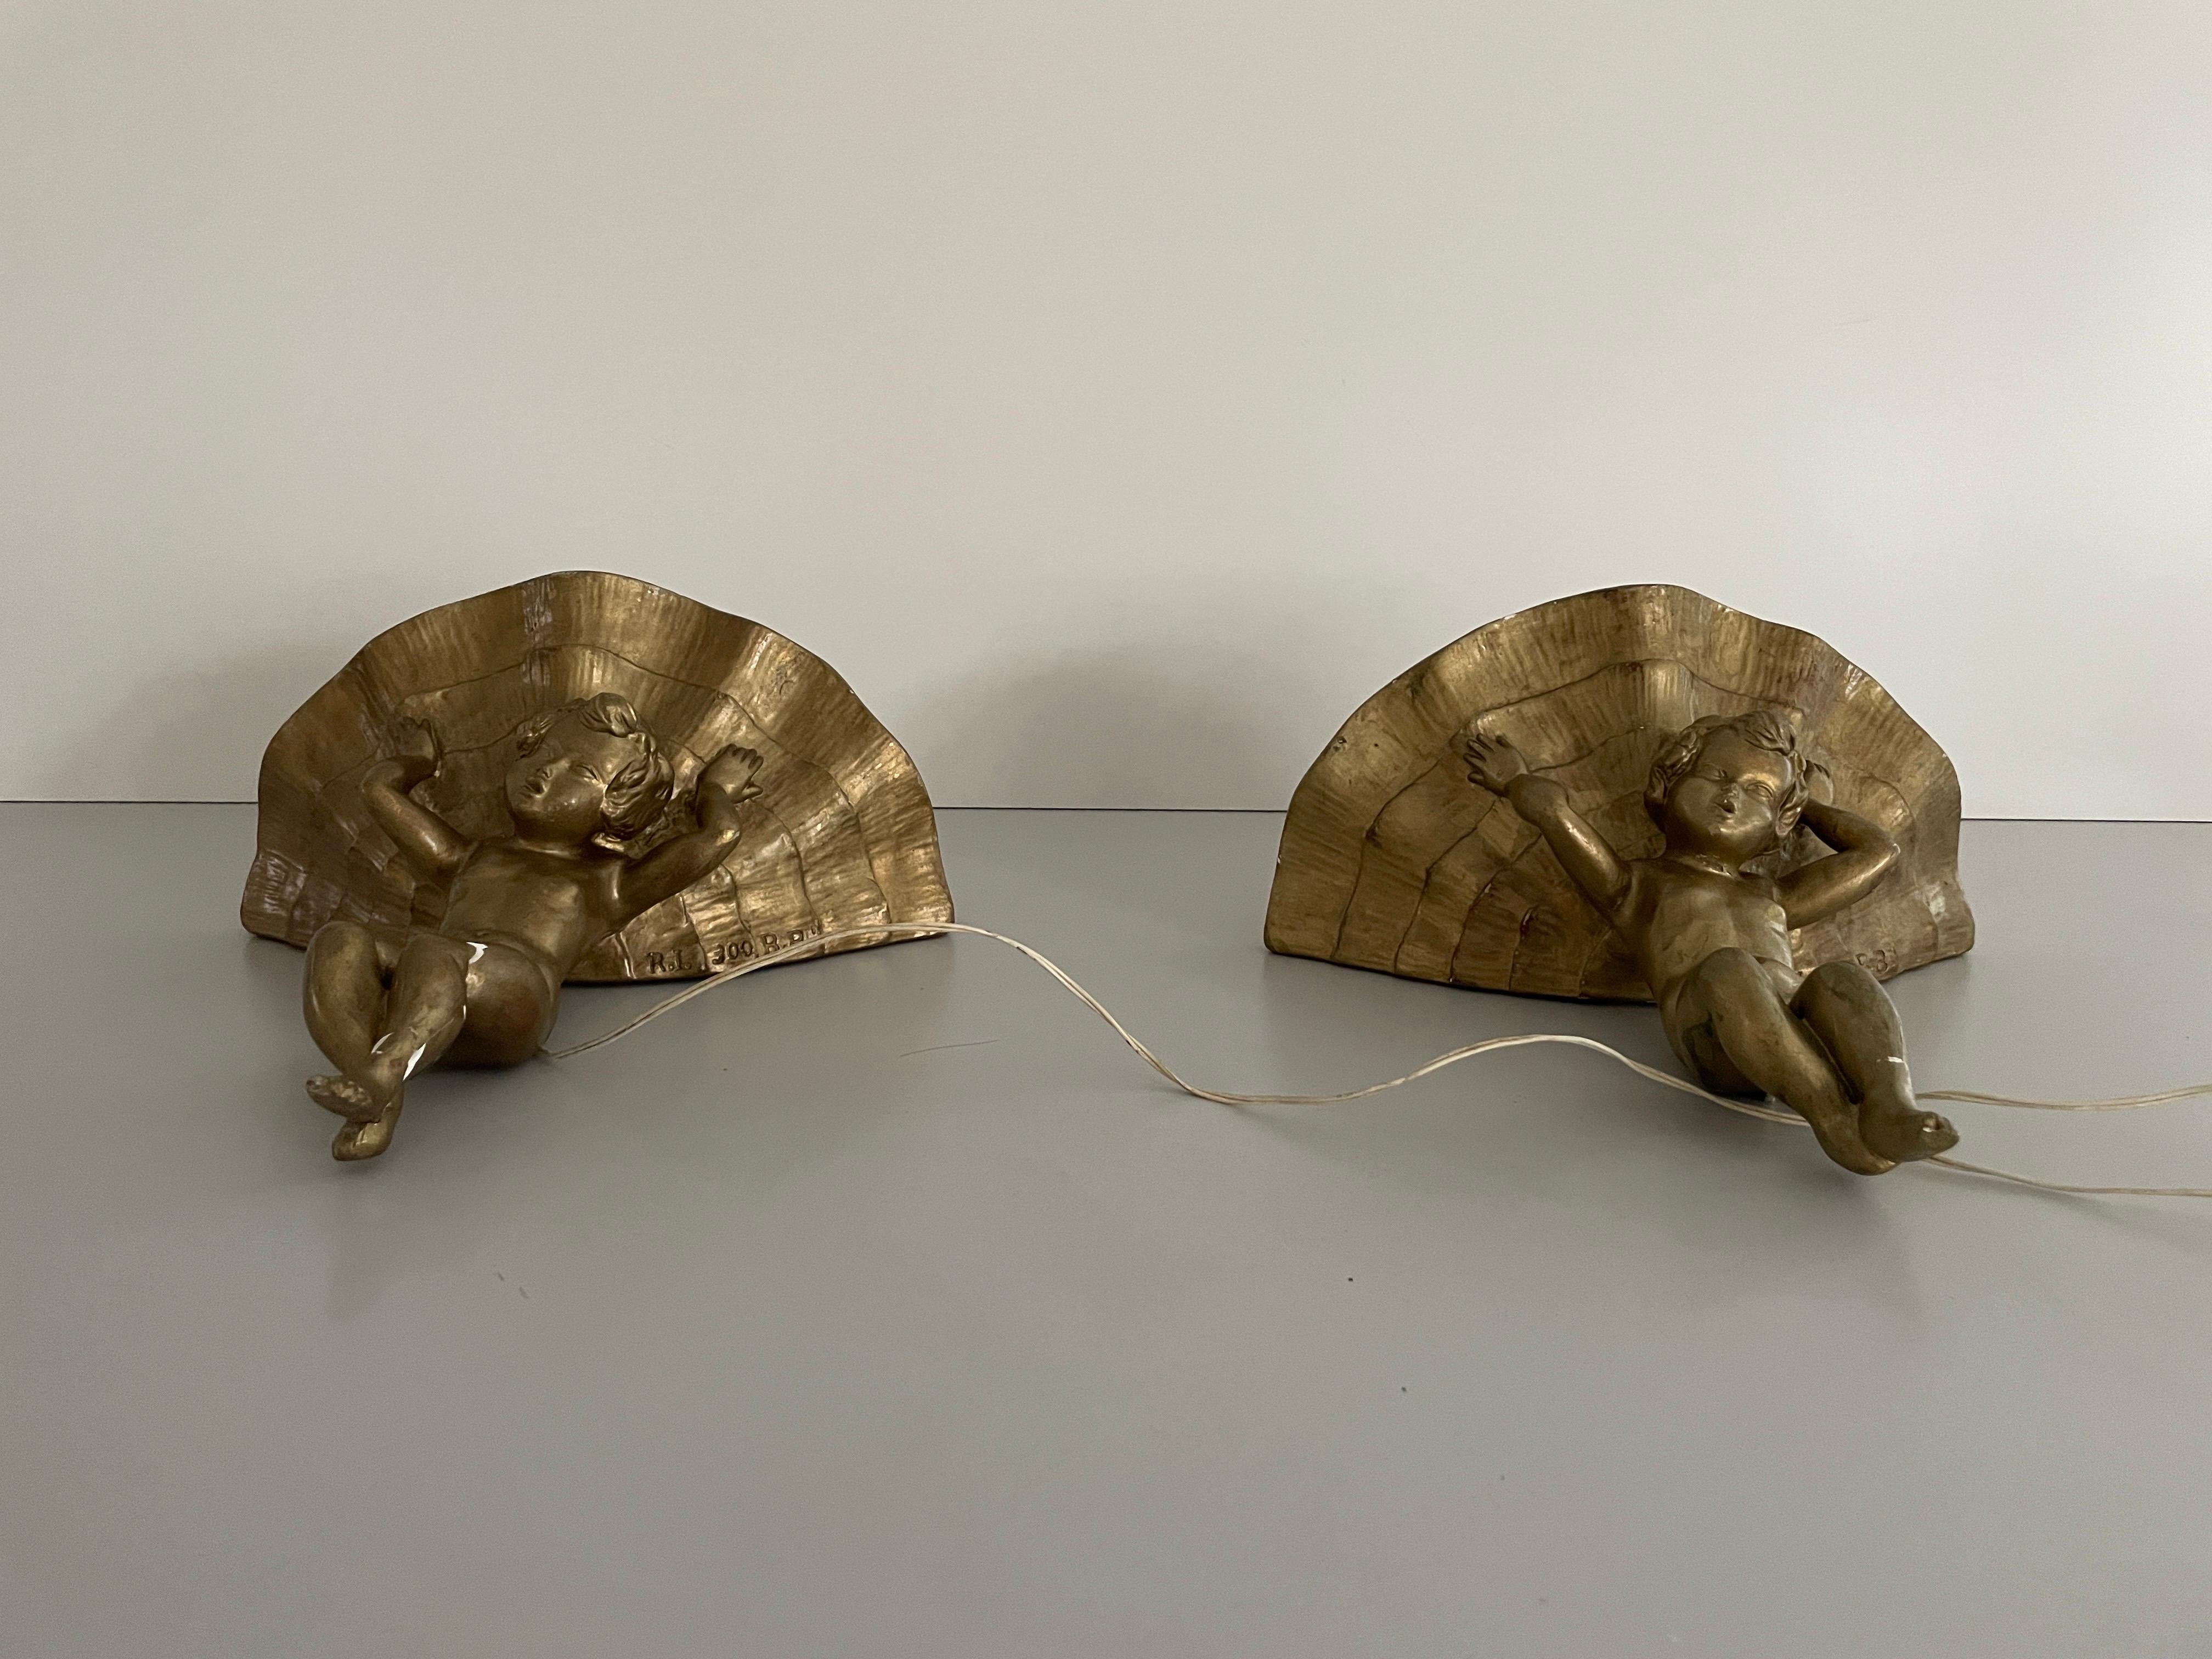 Italian Made of Plaster Gold Coloured Pair of Sconces in Angel Sculpture, 1960s, Italy For Sale